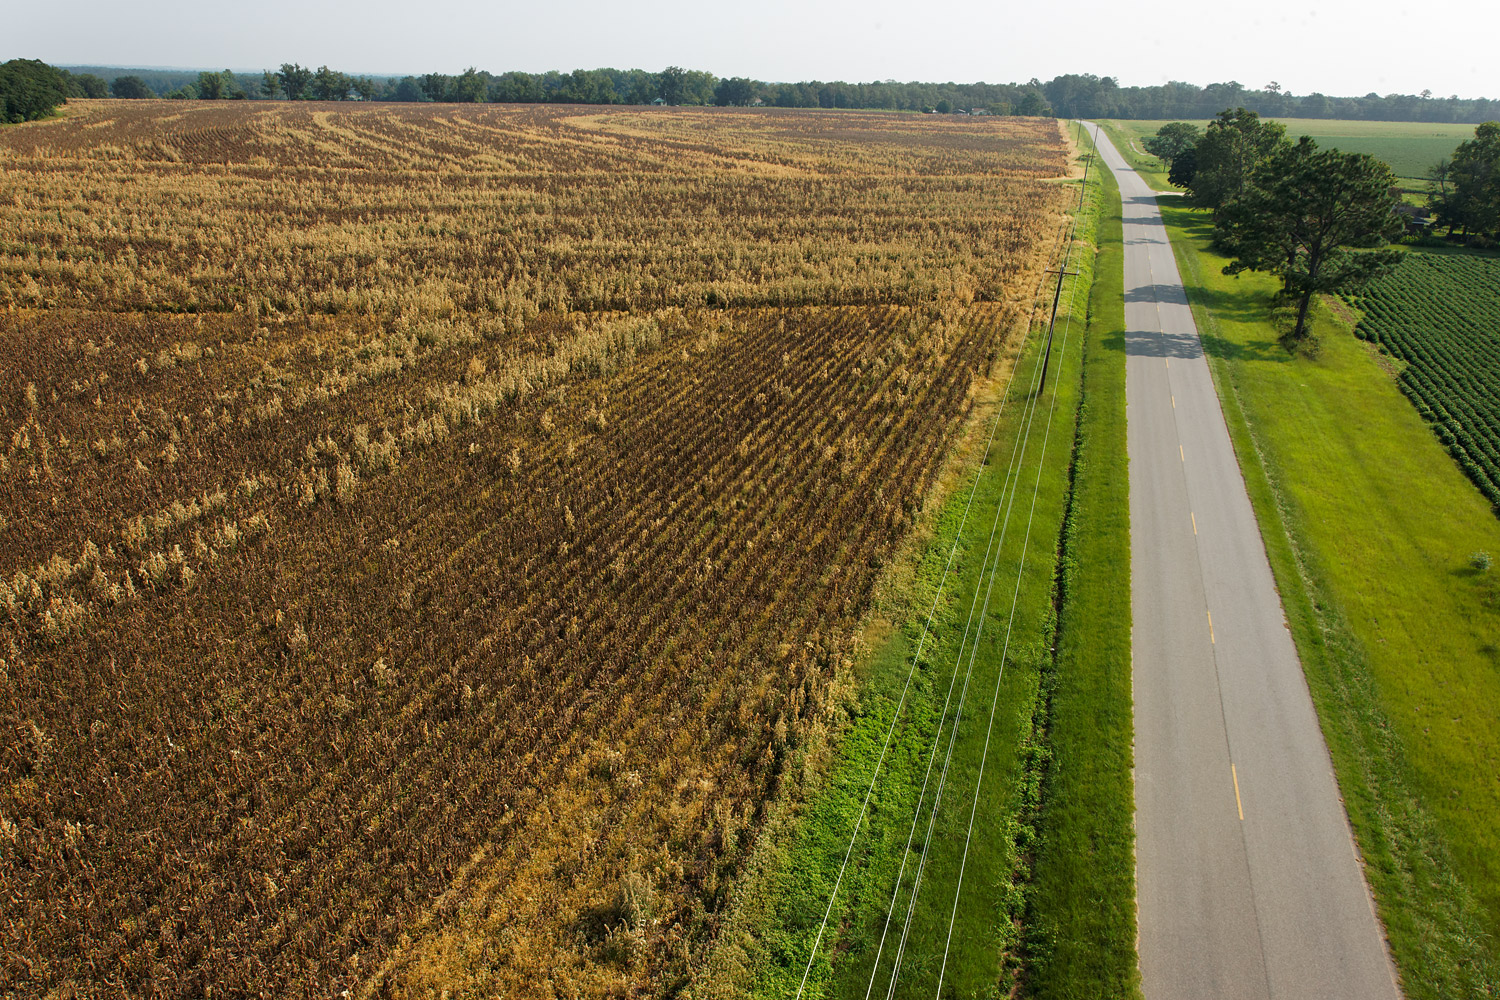 A recent brief spell of rain is enough to provide a burst of green along the road in southern Georgia, but not to rescue the failed crops at left.